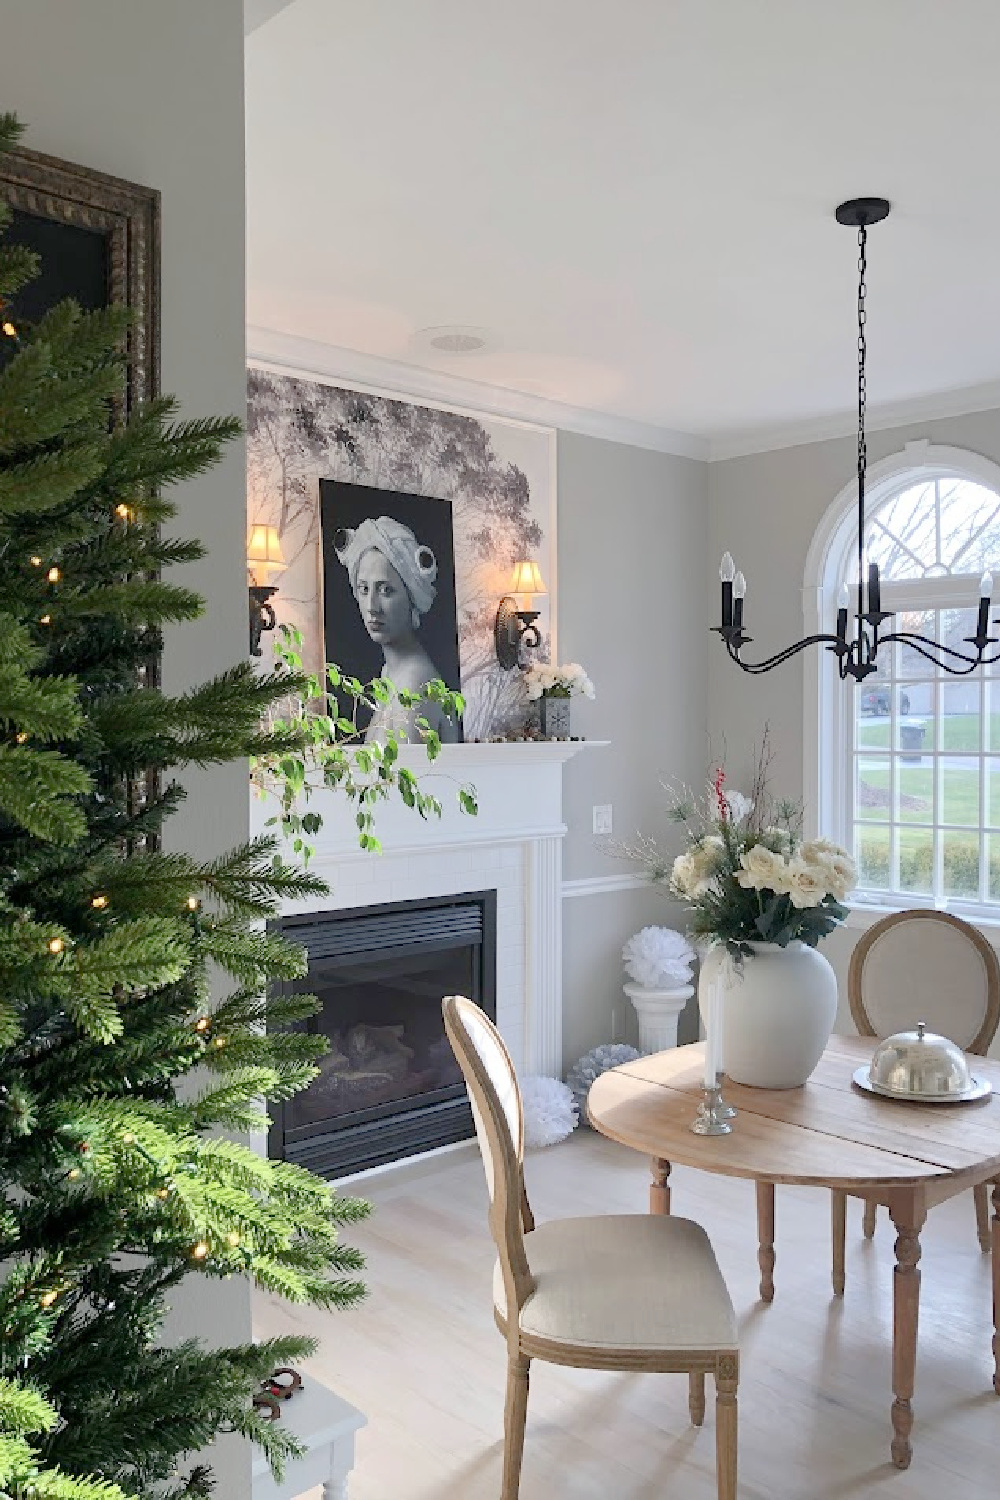 Christmas tree (Belgian Fir) near the dining room with fireplace, arched windows, and oval antique table with Louis style chairs - Hello Lovely Studio.